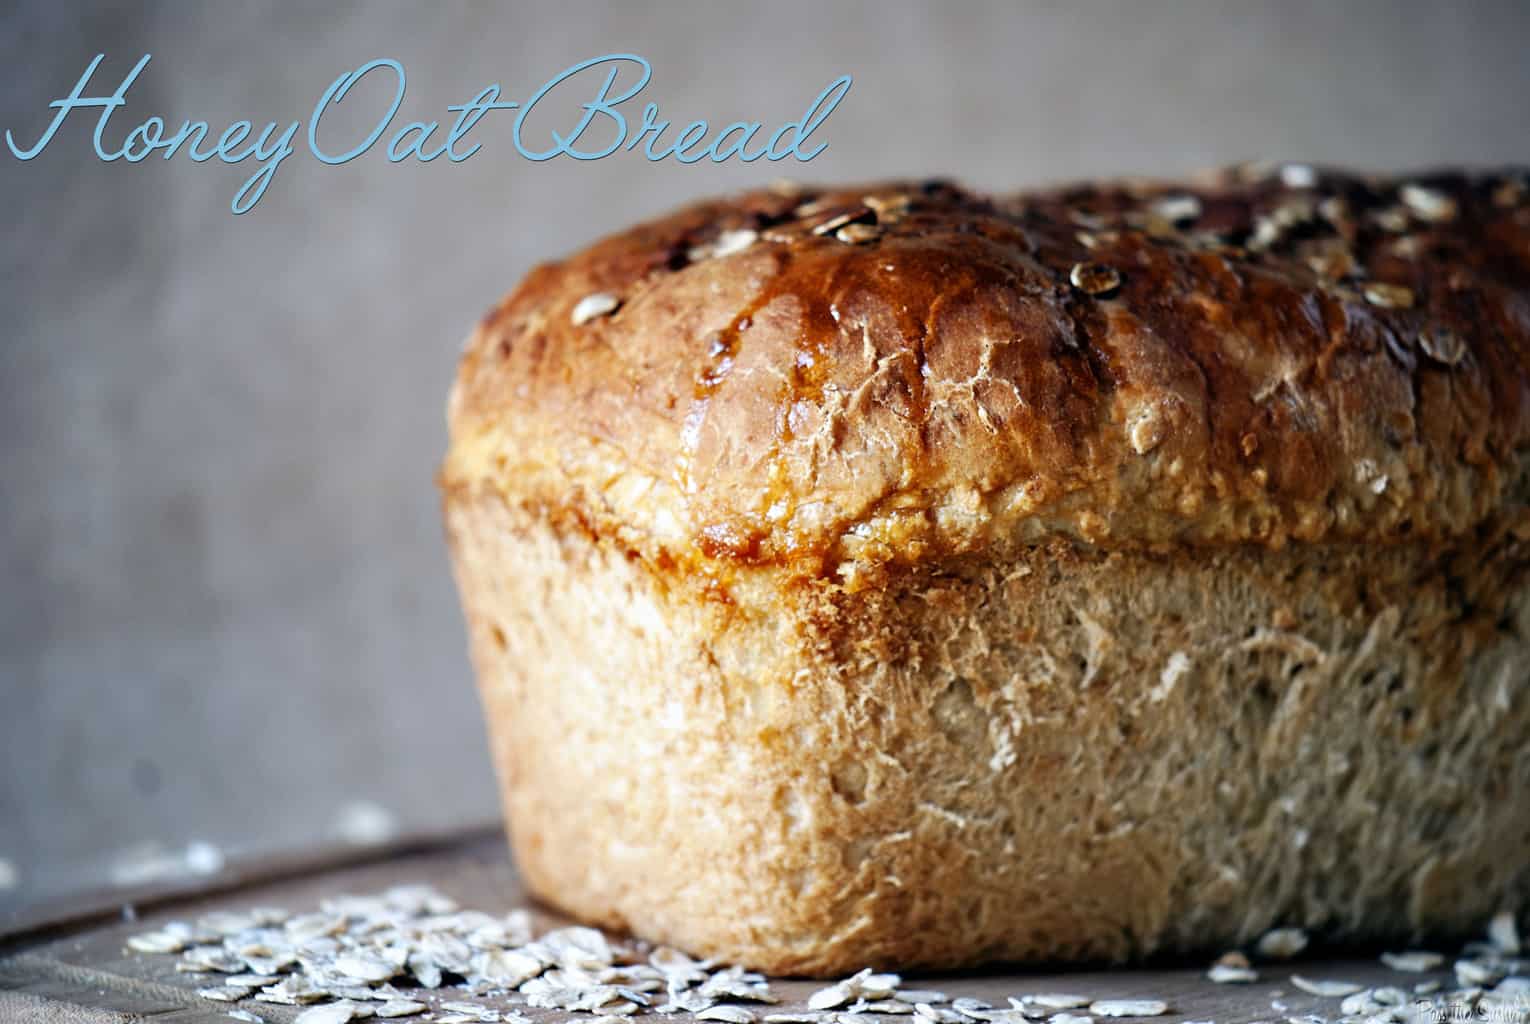 ﻿Honey oat bread ﻿is hearty sandwich bread, and perfect for toasting. The outer crust is rich and sweet, with a tender crumb inside. \\ PassTheSushi.com